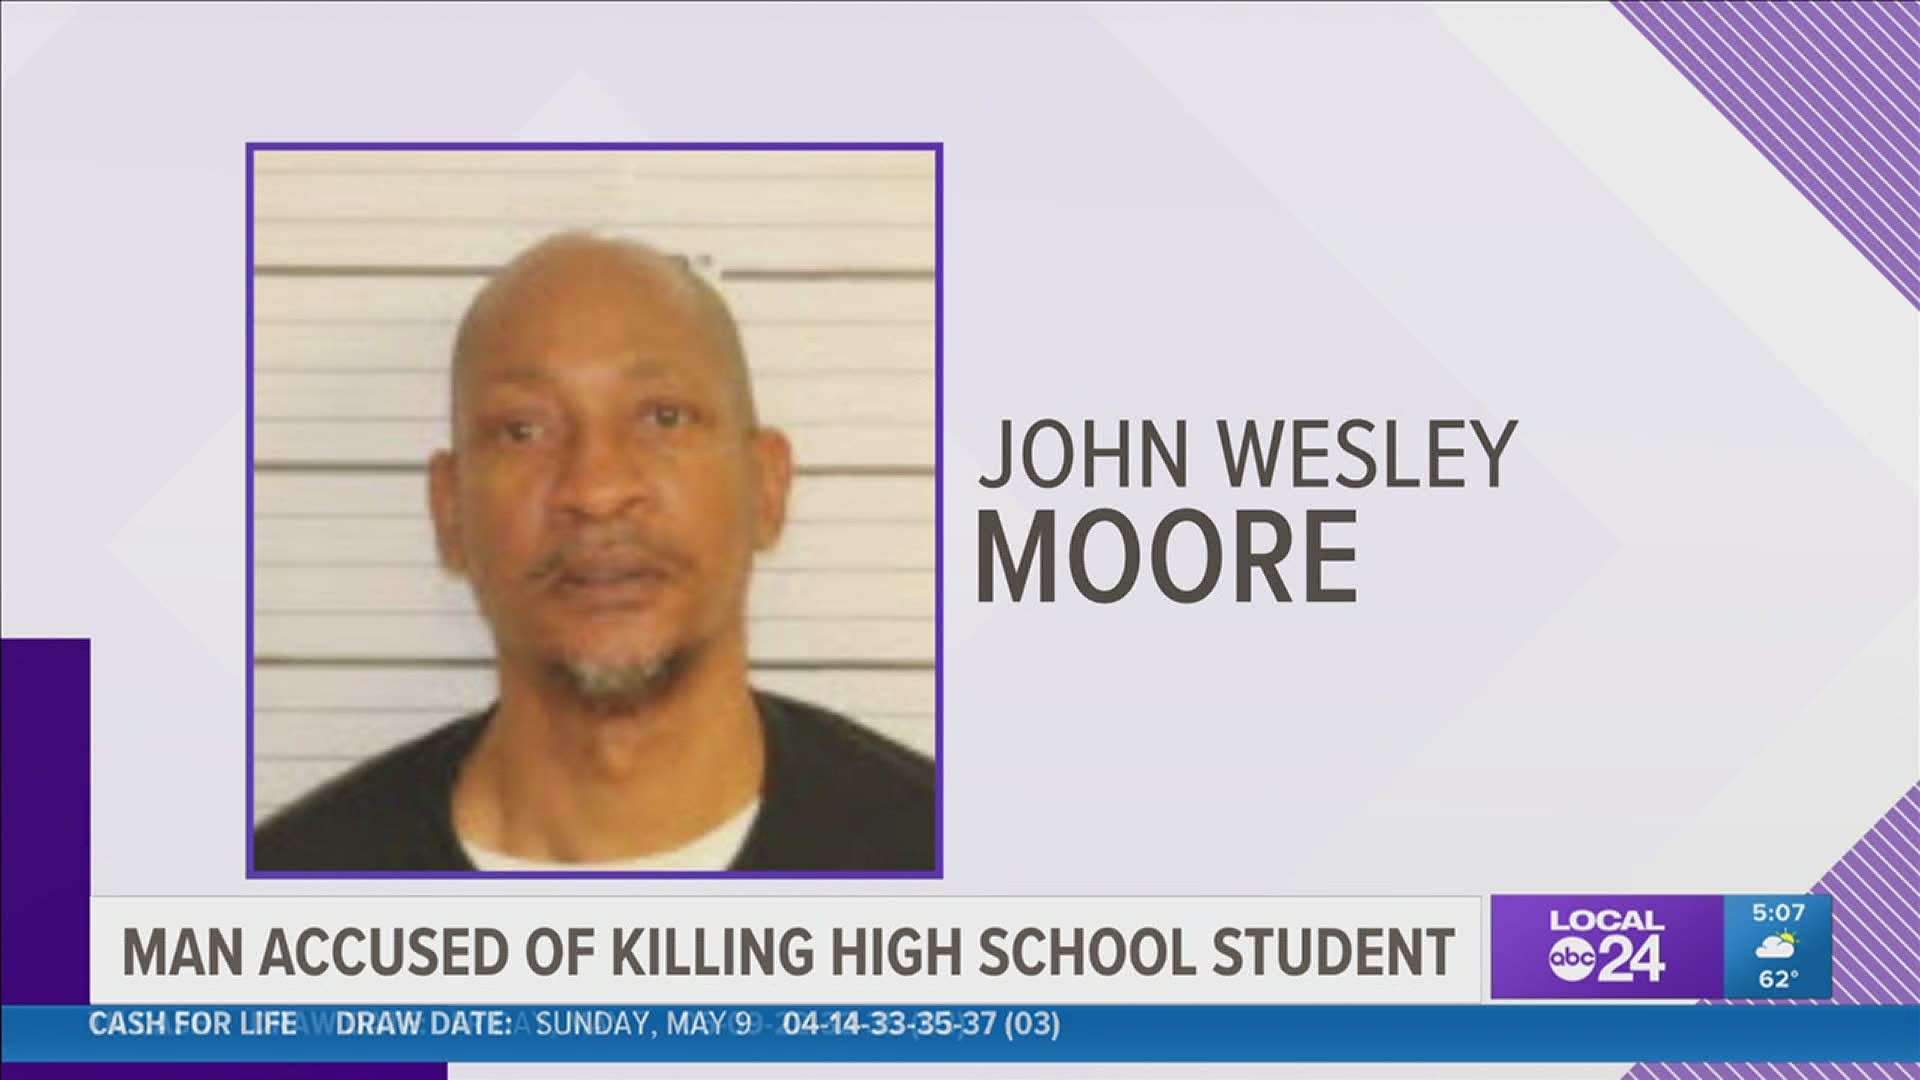 56-year-old John Wesley Moore was arrested and charged with second degree murder.